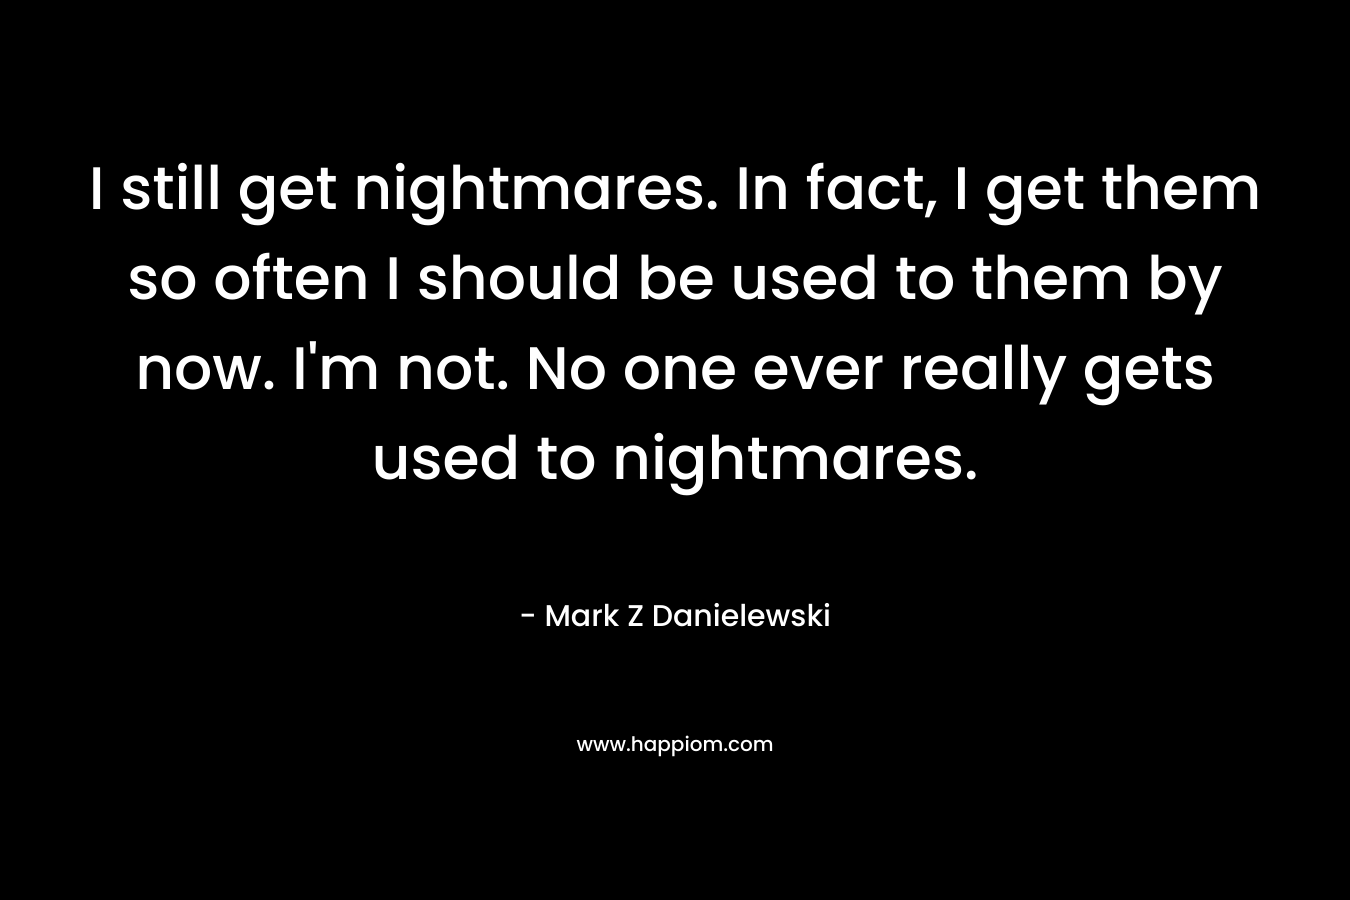 I still get nightmares. In fact, I get them so often I should be used to them by now. I'm not. No one ever really gets used to nightmares.